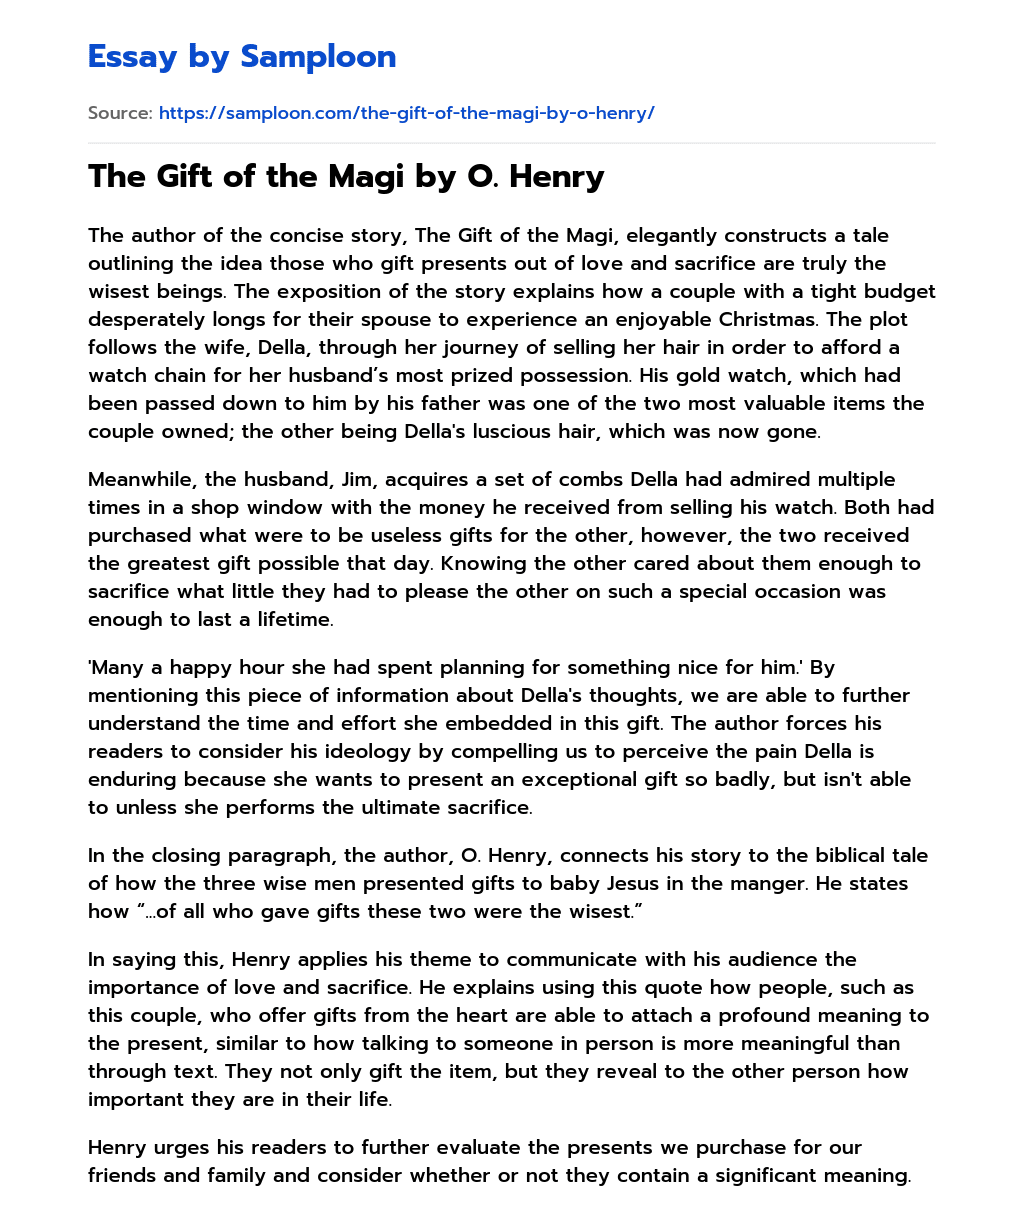 The Gift of the Magi by O. Henry essay